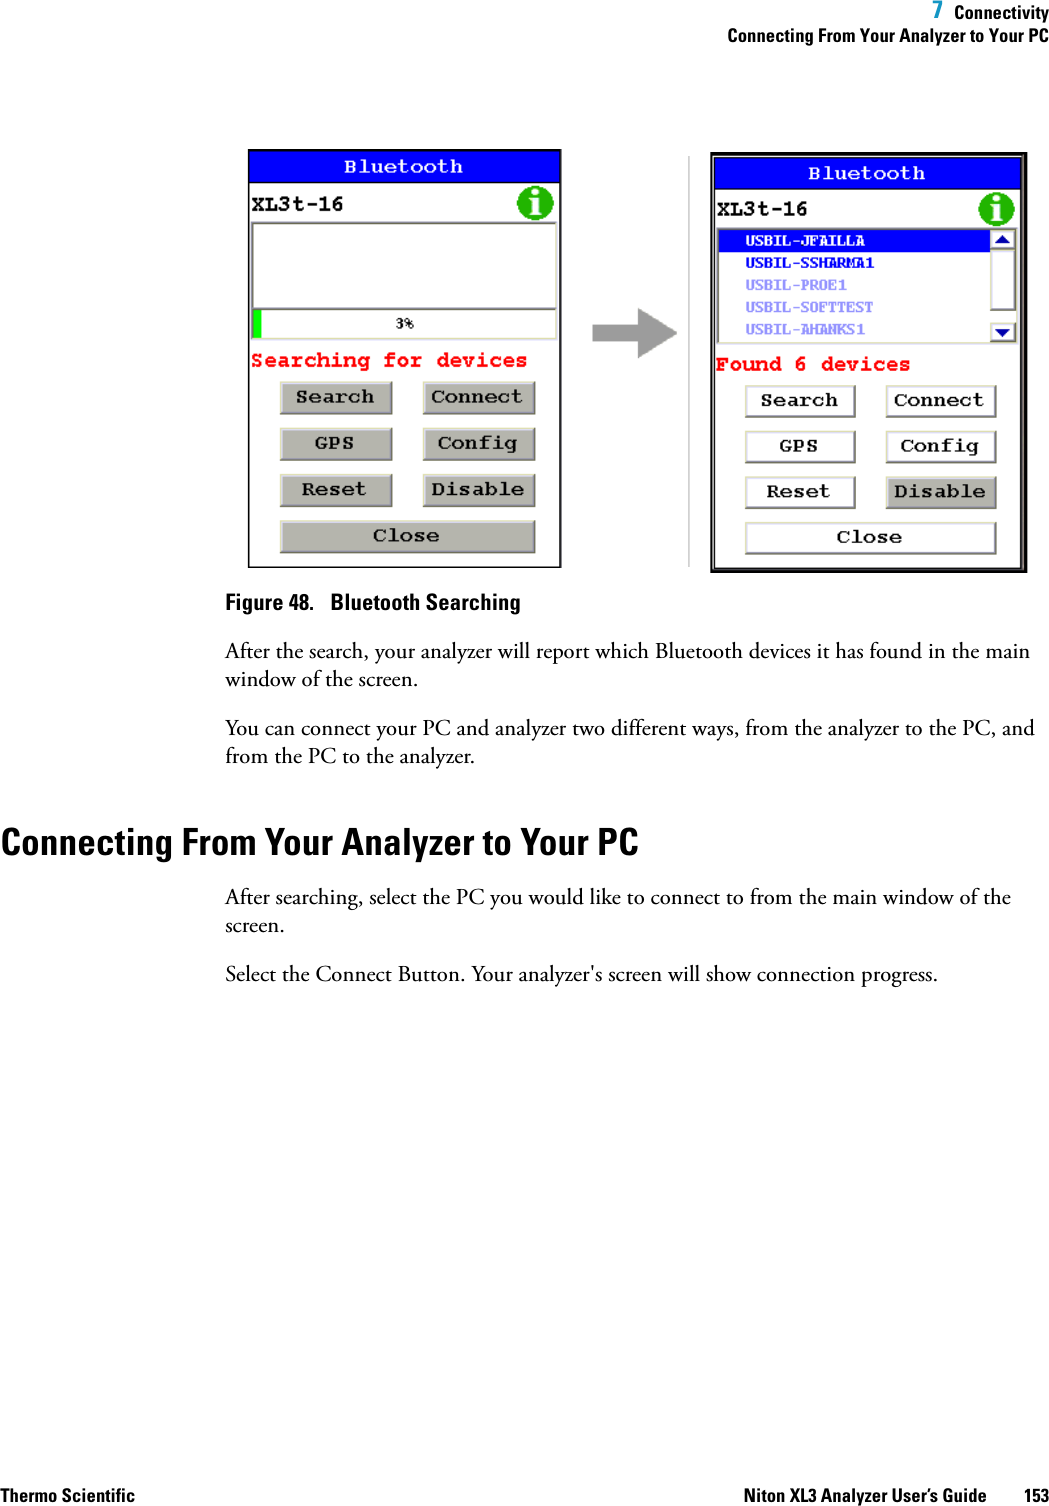  7  ConnectivityConnecting From Your Analyzer to Your PCThermo Scientific Niton XL3 Analyzer User’s Guide 153Figure 48.  Bluetooth SearchingAfter the search, your analyzer will report which Bluetooth devices it has found in the main window of the screen.You can connect your PC and analyzer two different ways, from the analyzer to the PC, and from the PC to the analyzer.Connecting From Your Analyzer to Your PCAfter searching, select the PC you would like to connect to from the main window of the screen.Select the Connect Button. Your analyzer&apos;s screen will show connection progress.